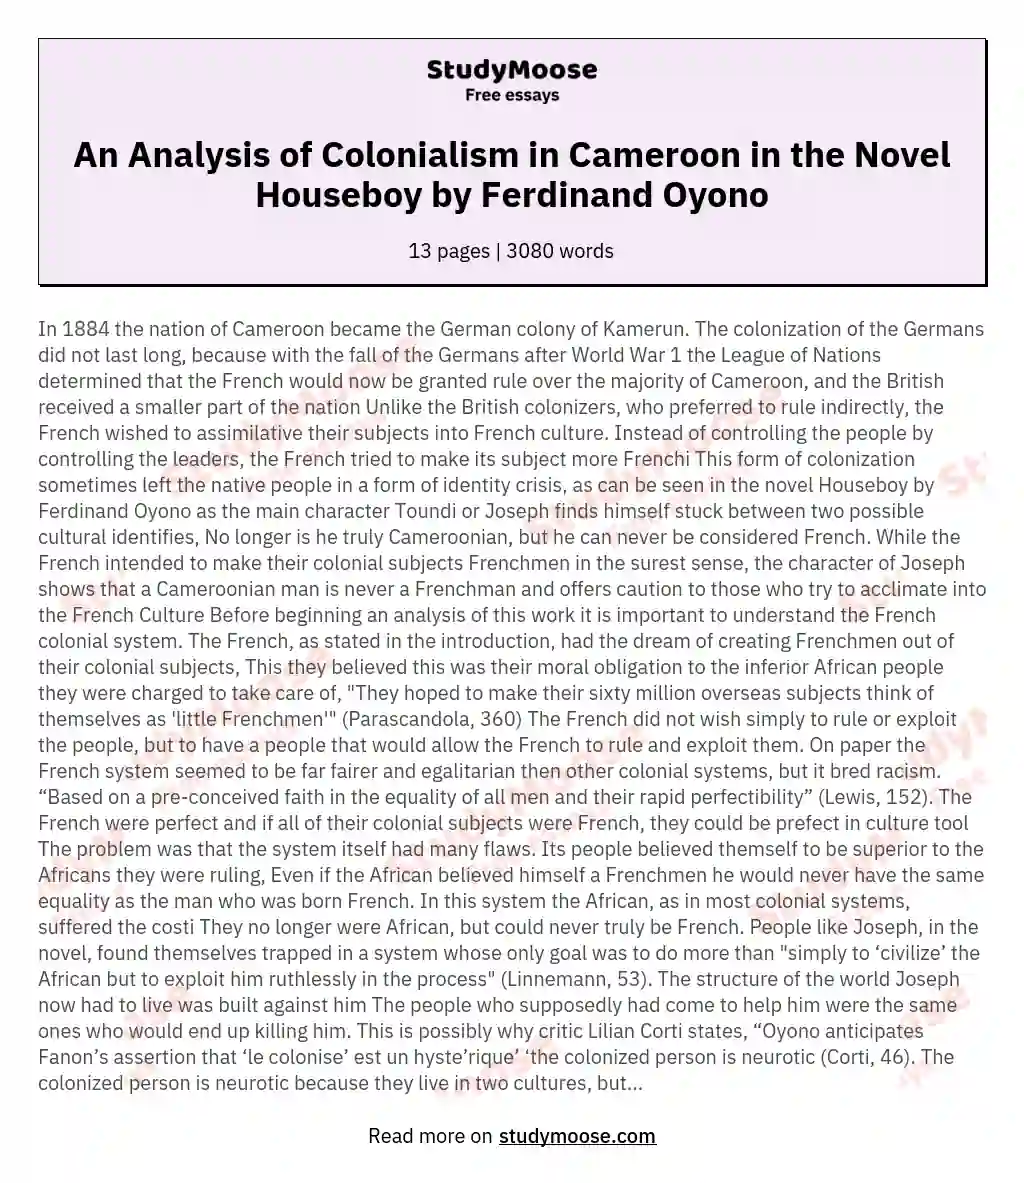 An Analysis of Colonialism in Cameroon in the Novel Houseboy by Ferdinand Oyono essay